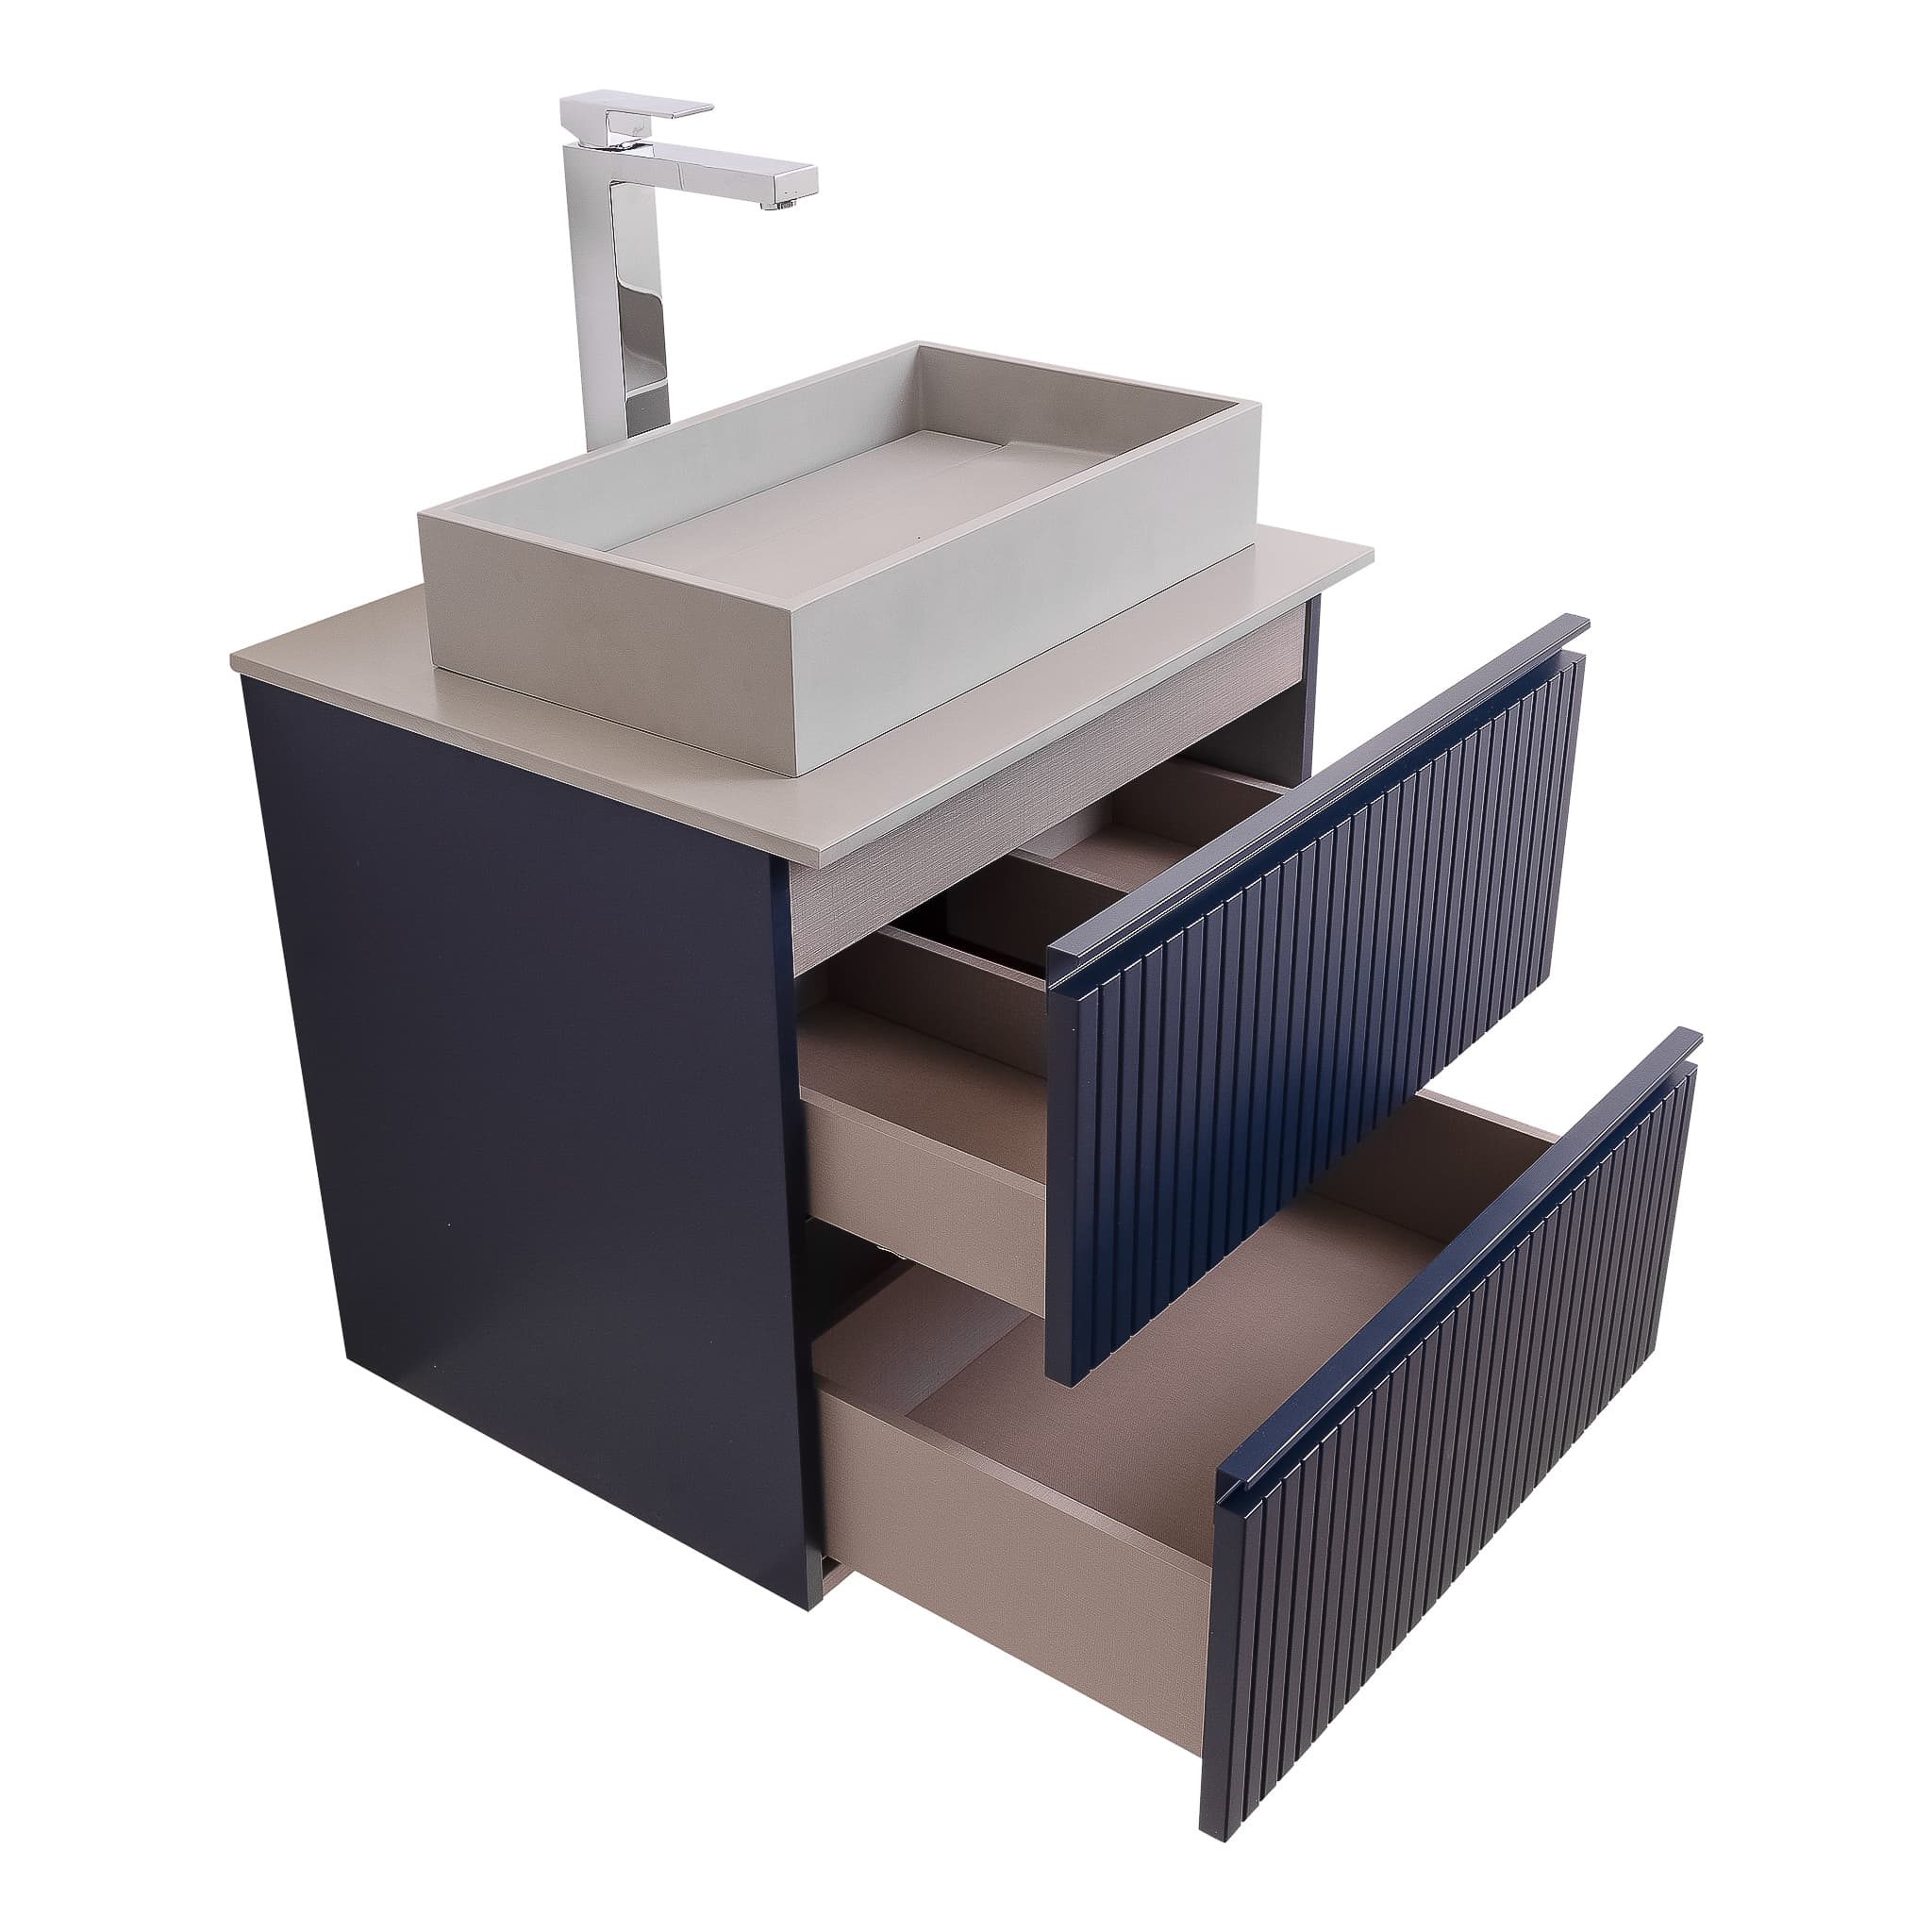 Ares 23.5 Matte Navy Blue Cabinet, Solid Surface Flat Grey Counter And Infinity Square Solid Surface Grey Basin 1329, Wall Mounted Modern Vanity Set